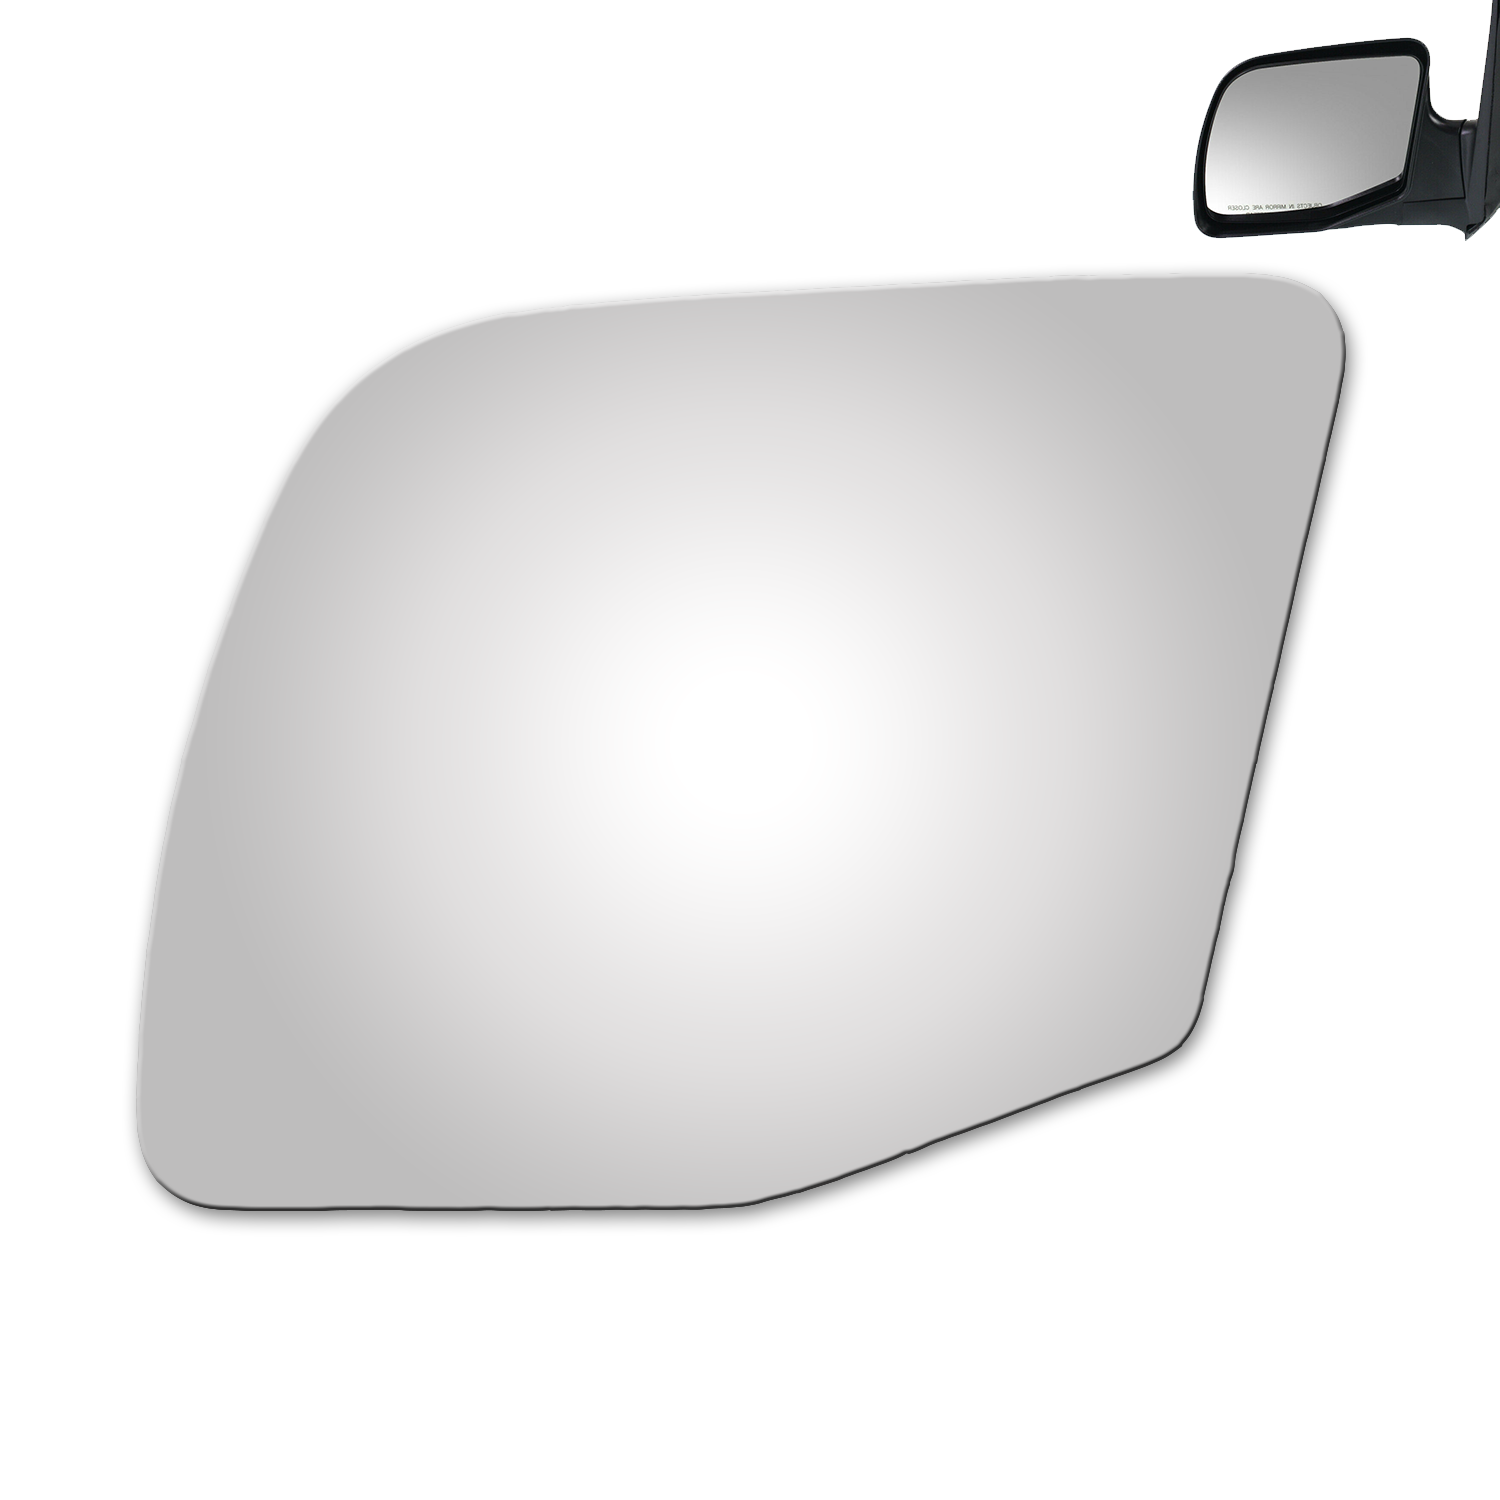 WLLW Replacement Mirror Glass for 1992-2007 Ford E Super Duty/E150/E250/E350/E450, Driver Left Side LH/Passenger Right Side RH/The Both Sides Flat Convex M-0075